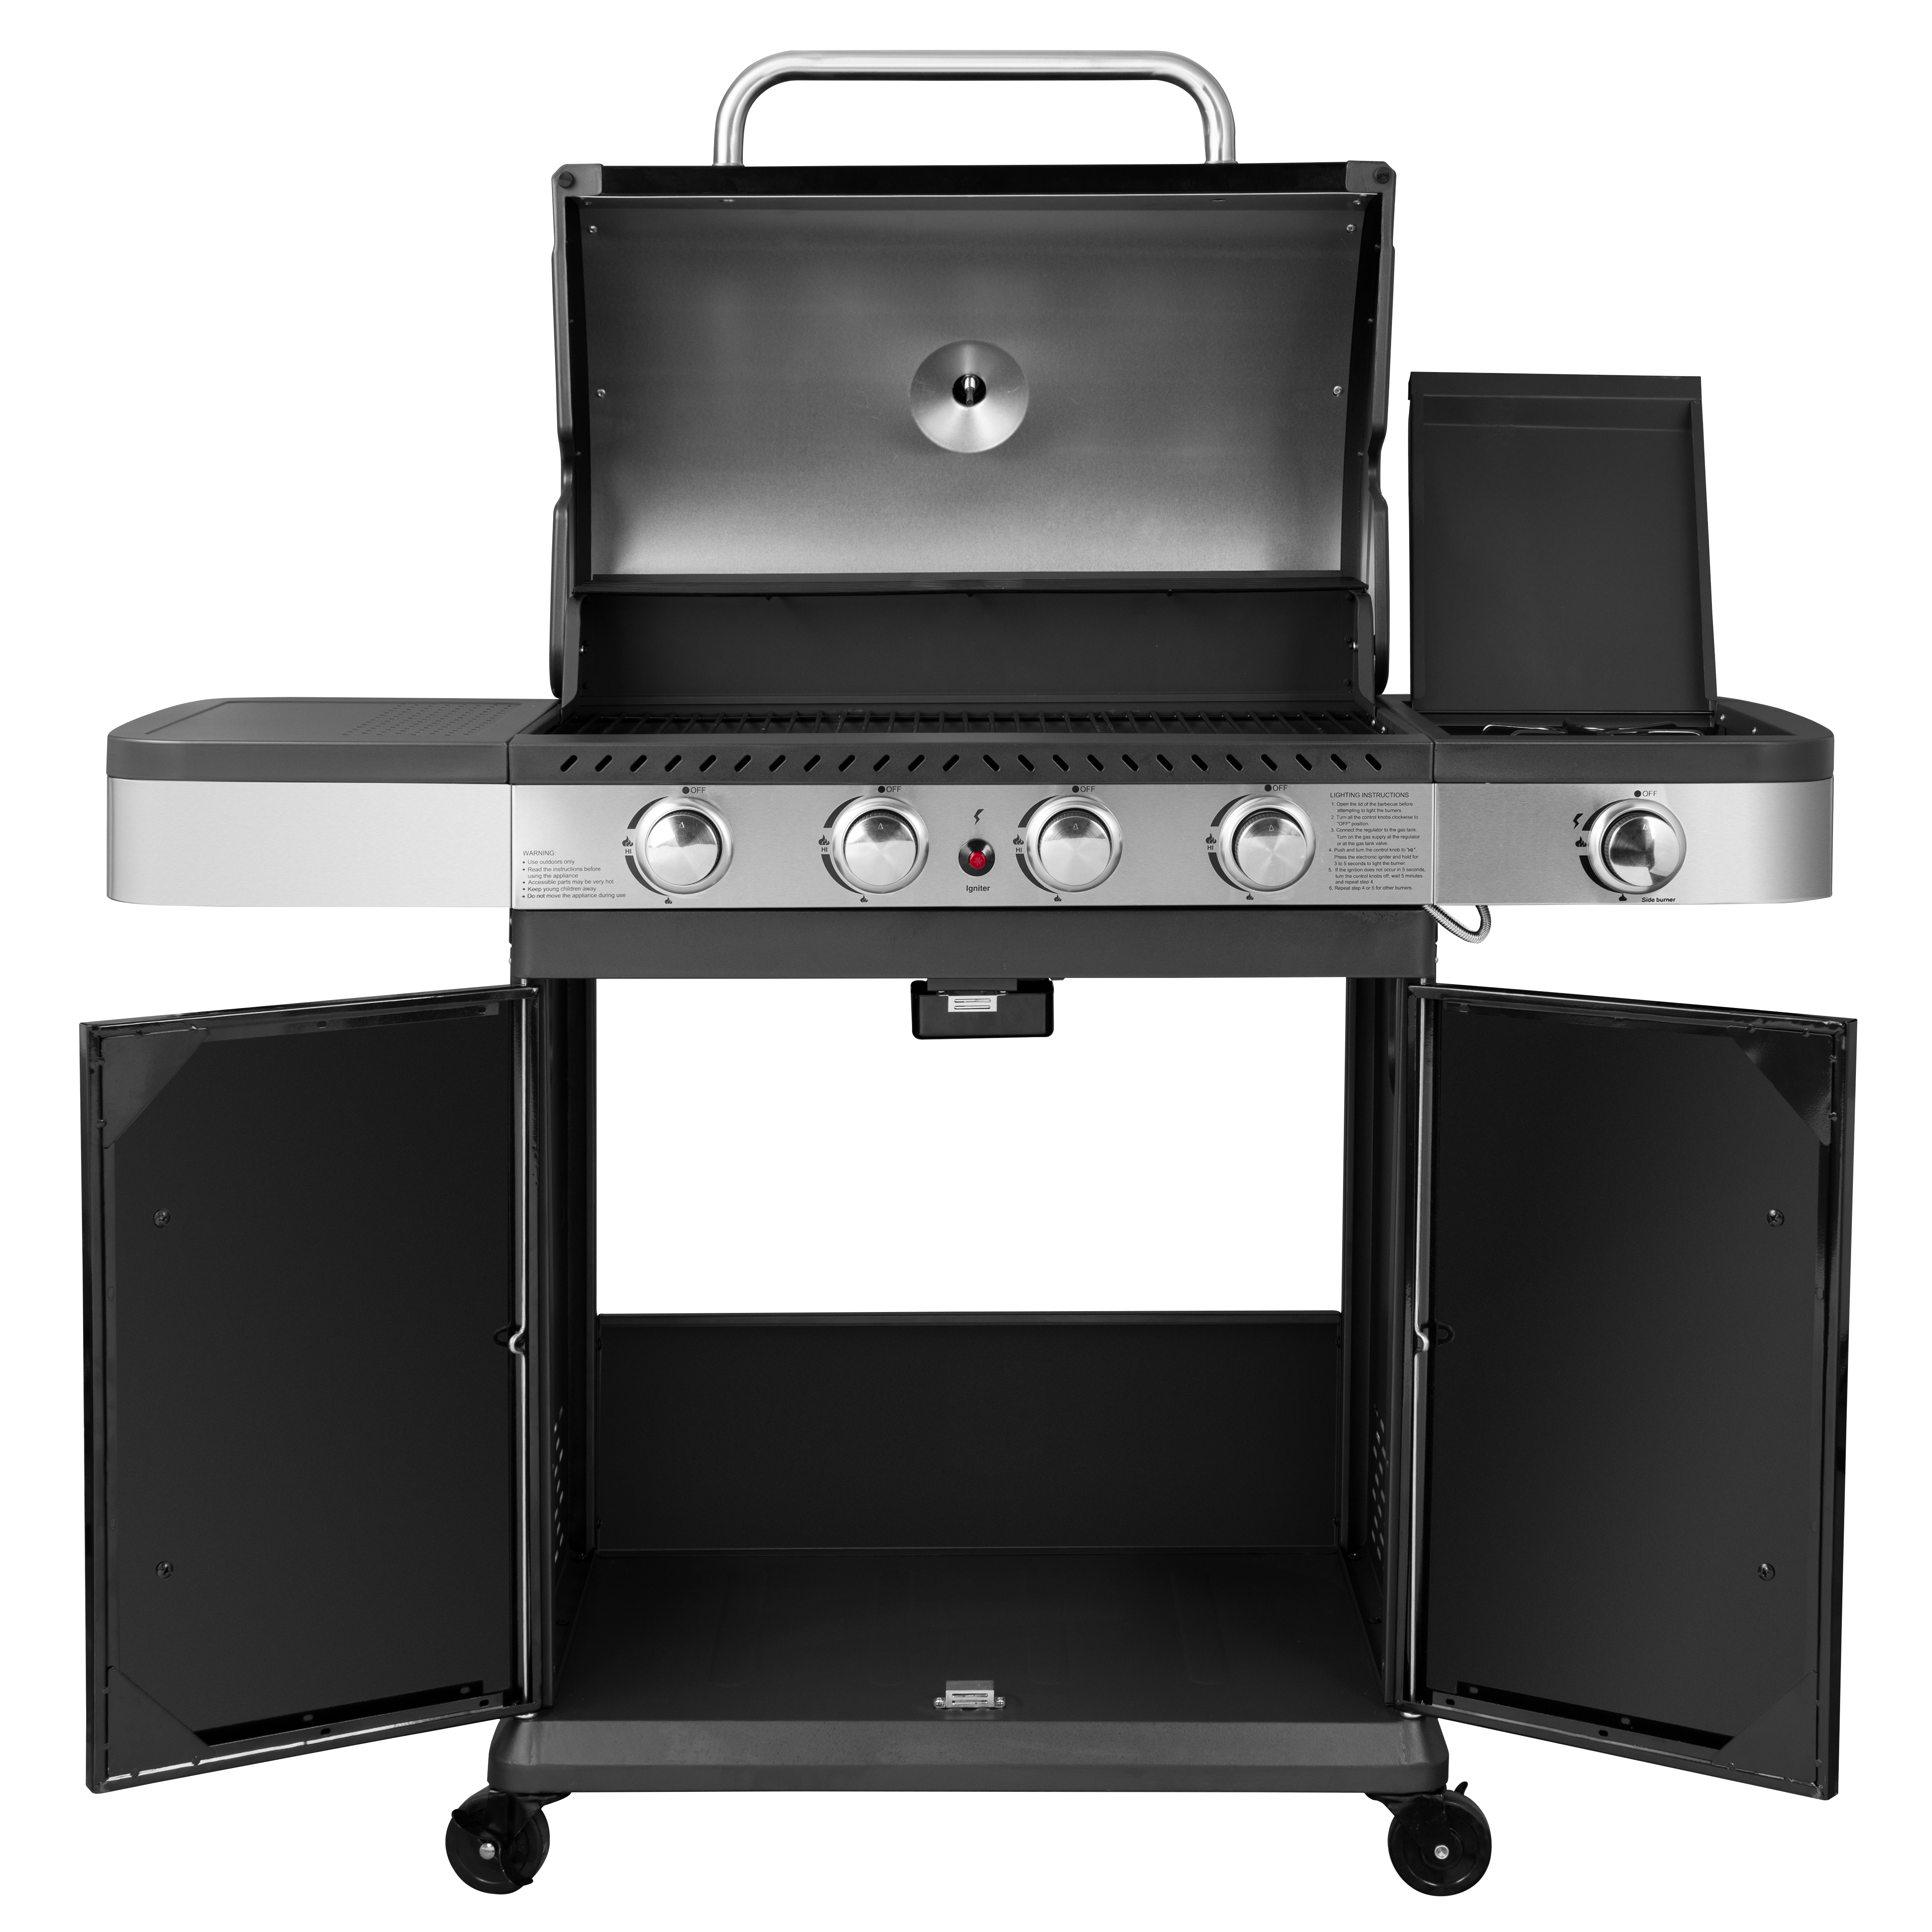 Gas Barbeque Premium with 4 Burners and a side cob Unimac - 3